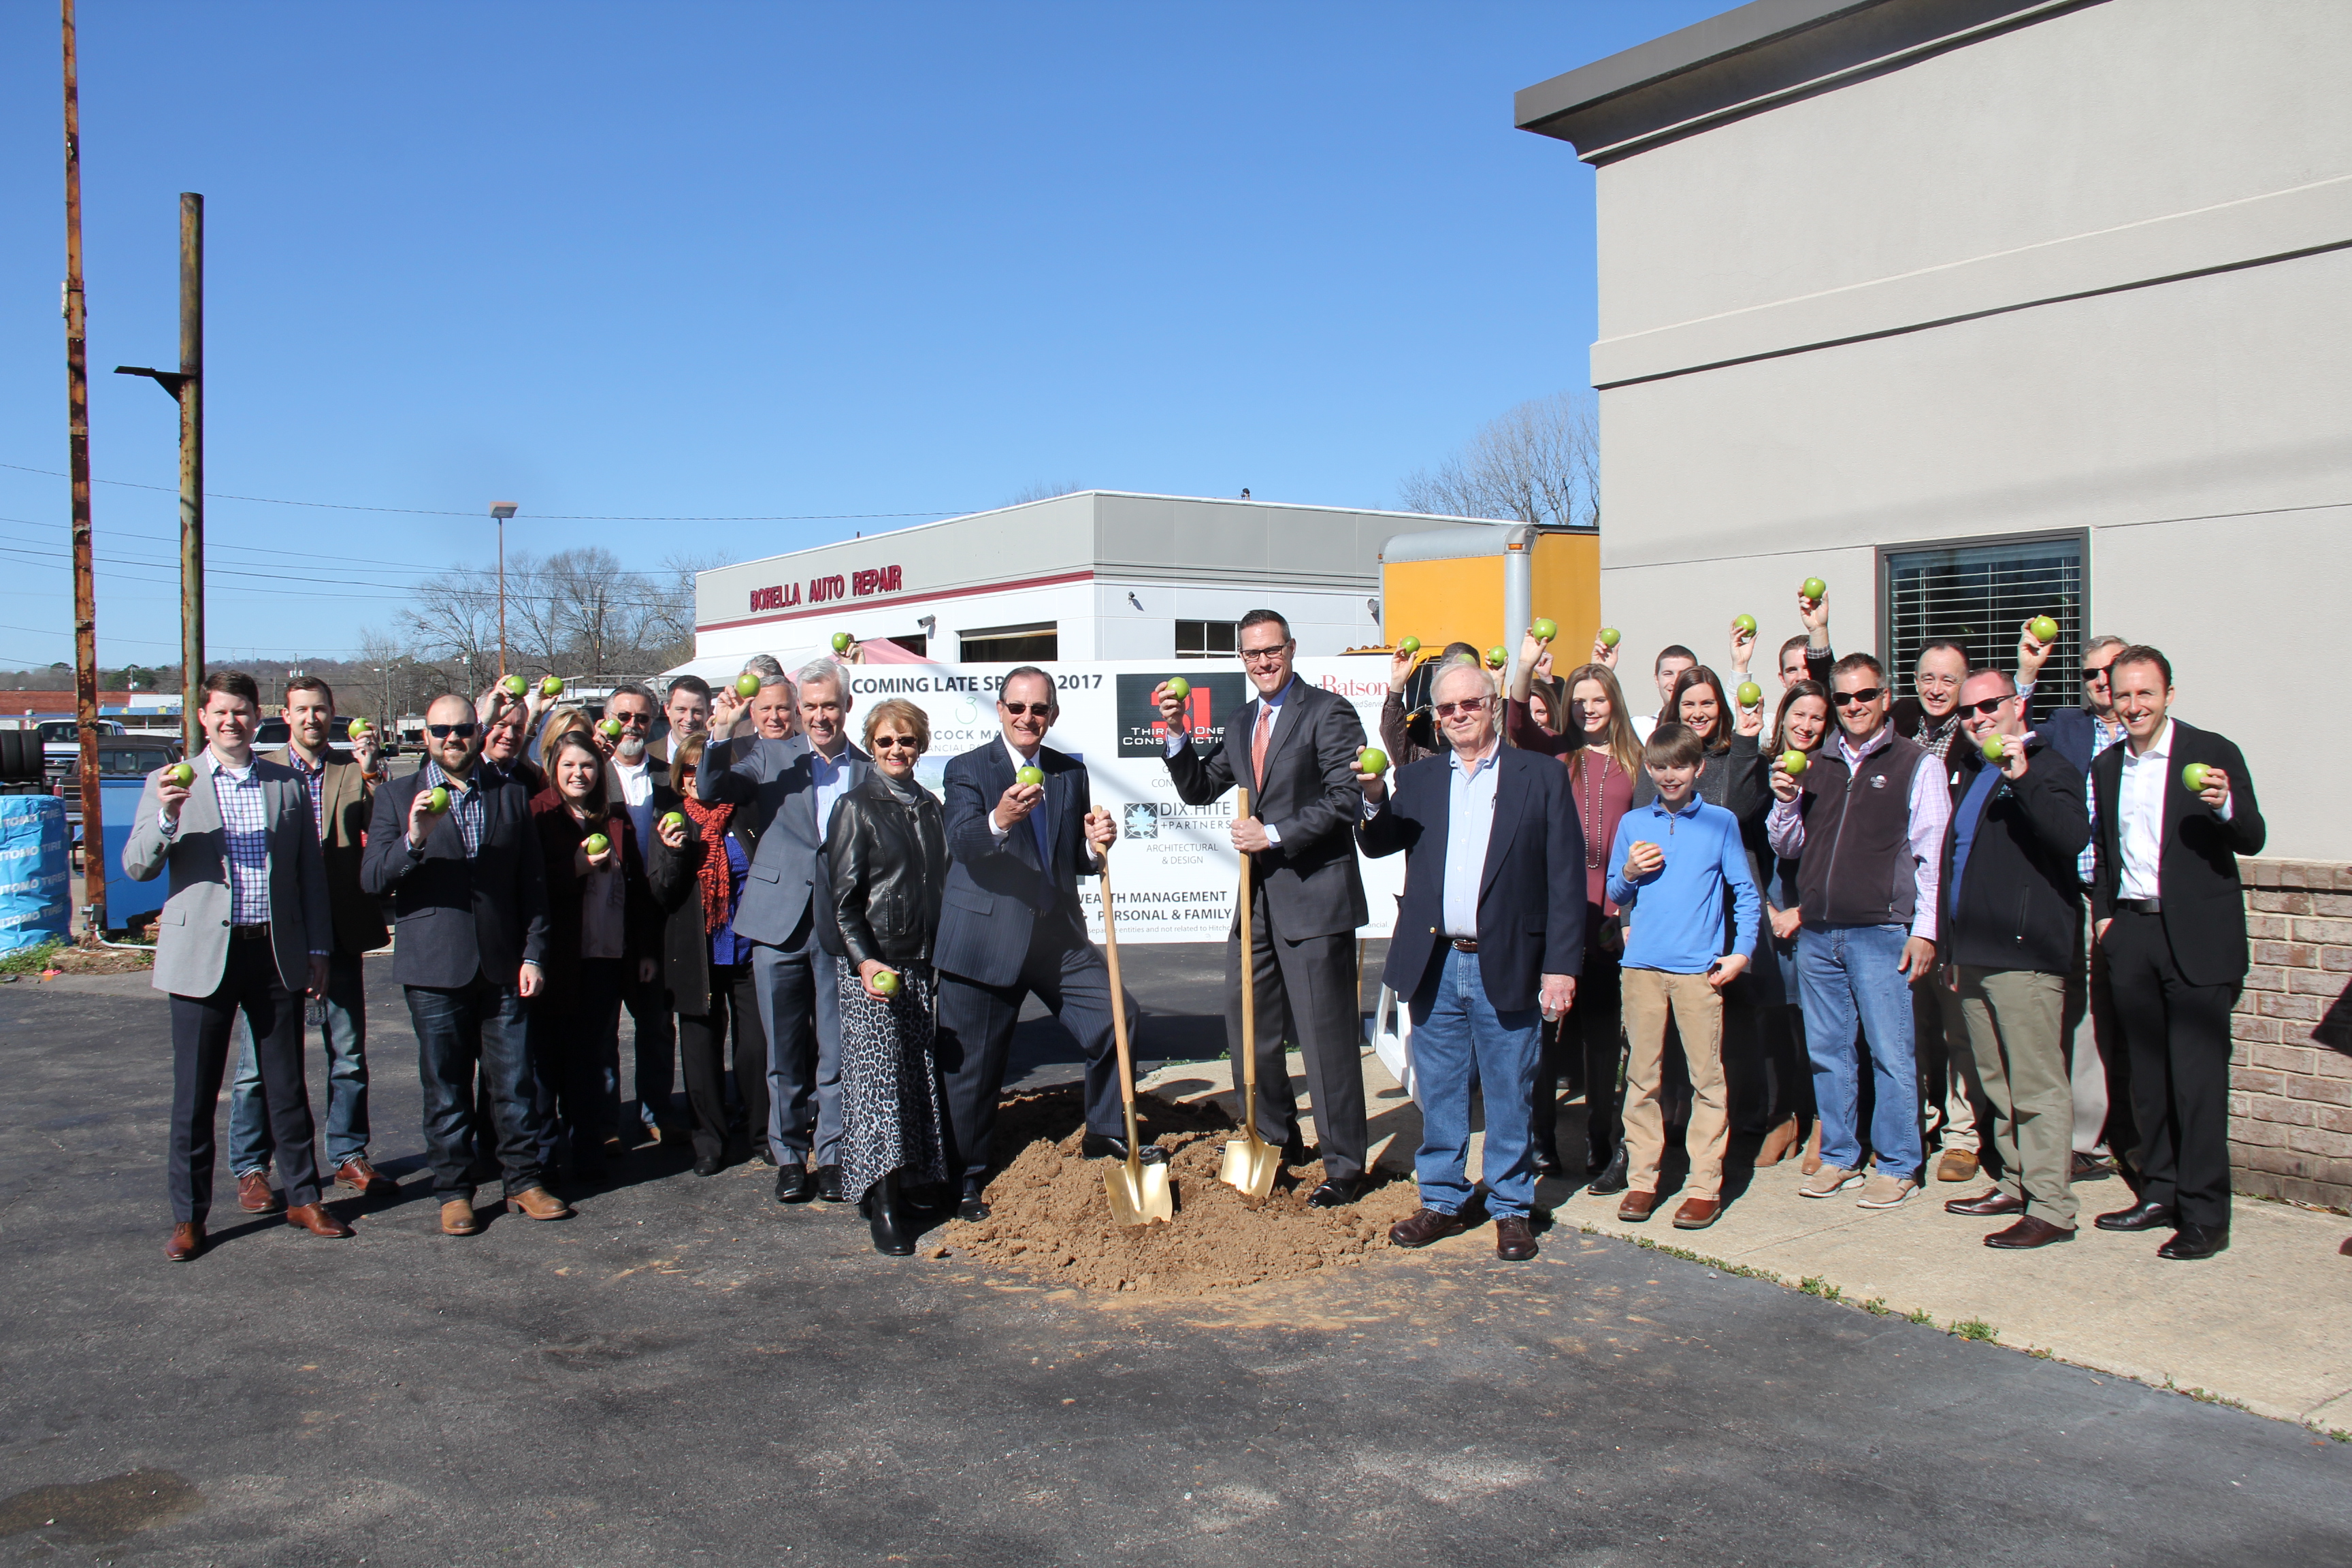 Hitchcock-Maddox breaks ground on addition to their building in downtown Trussville